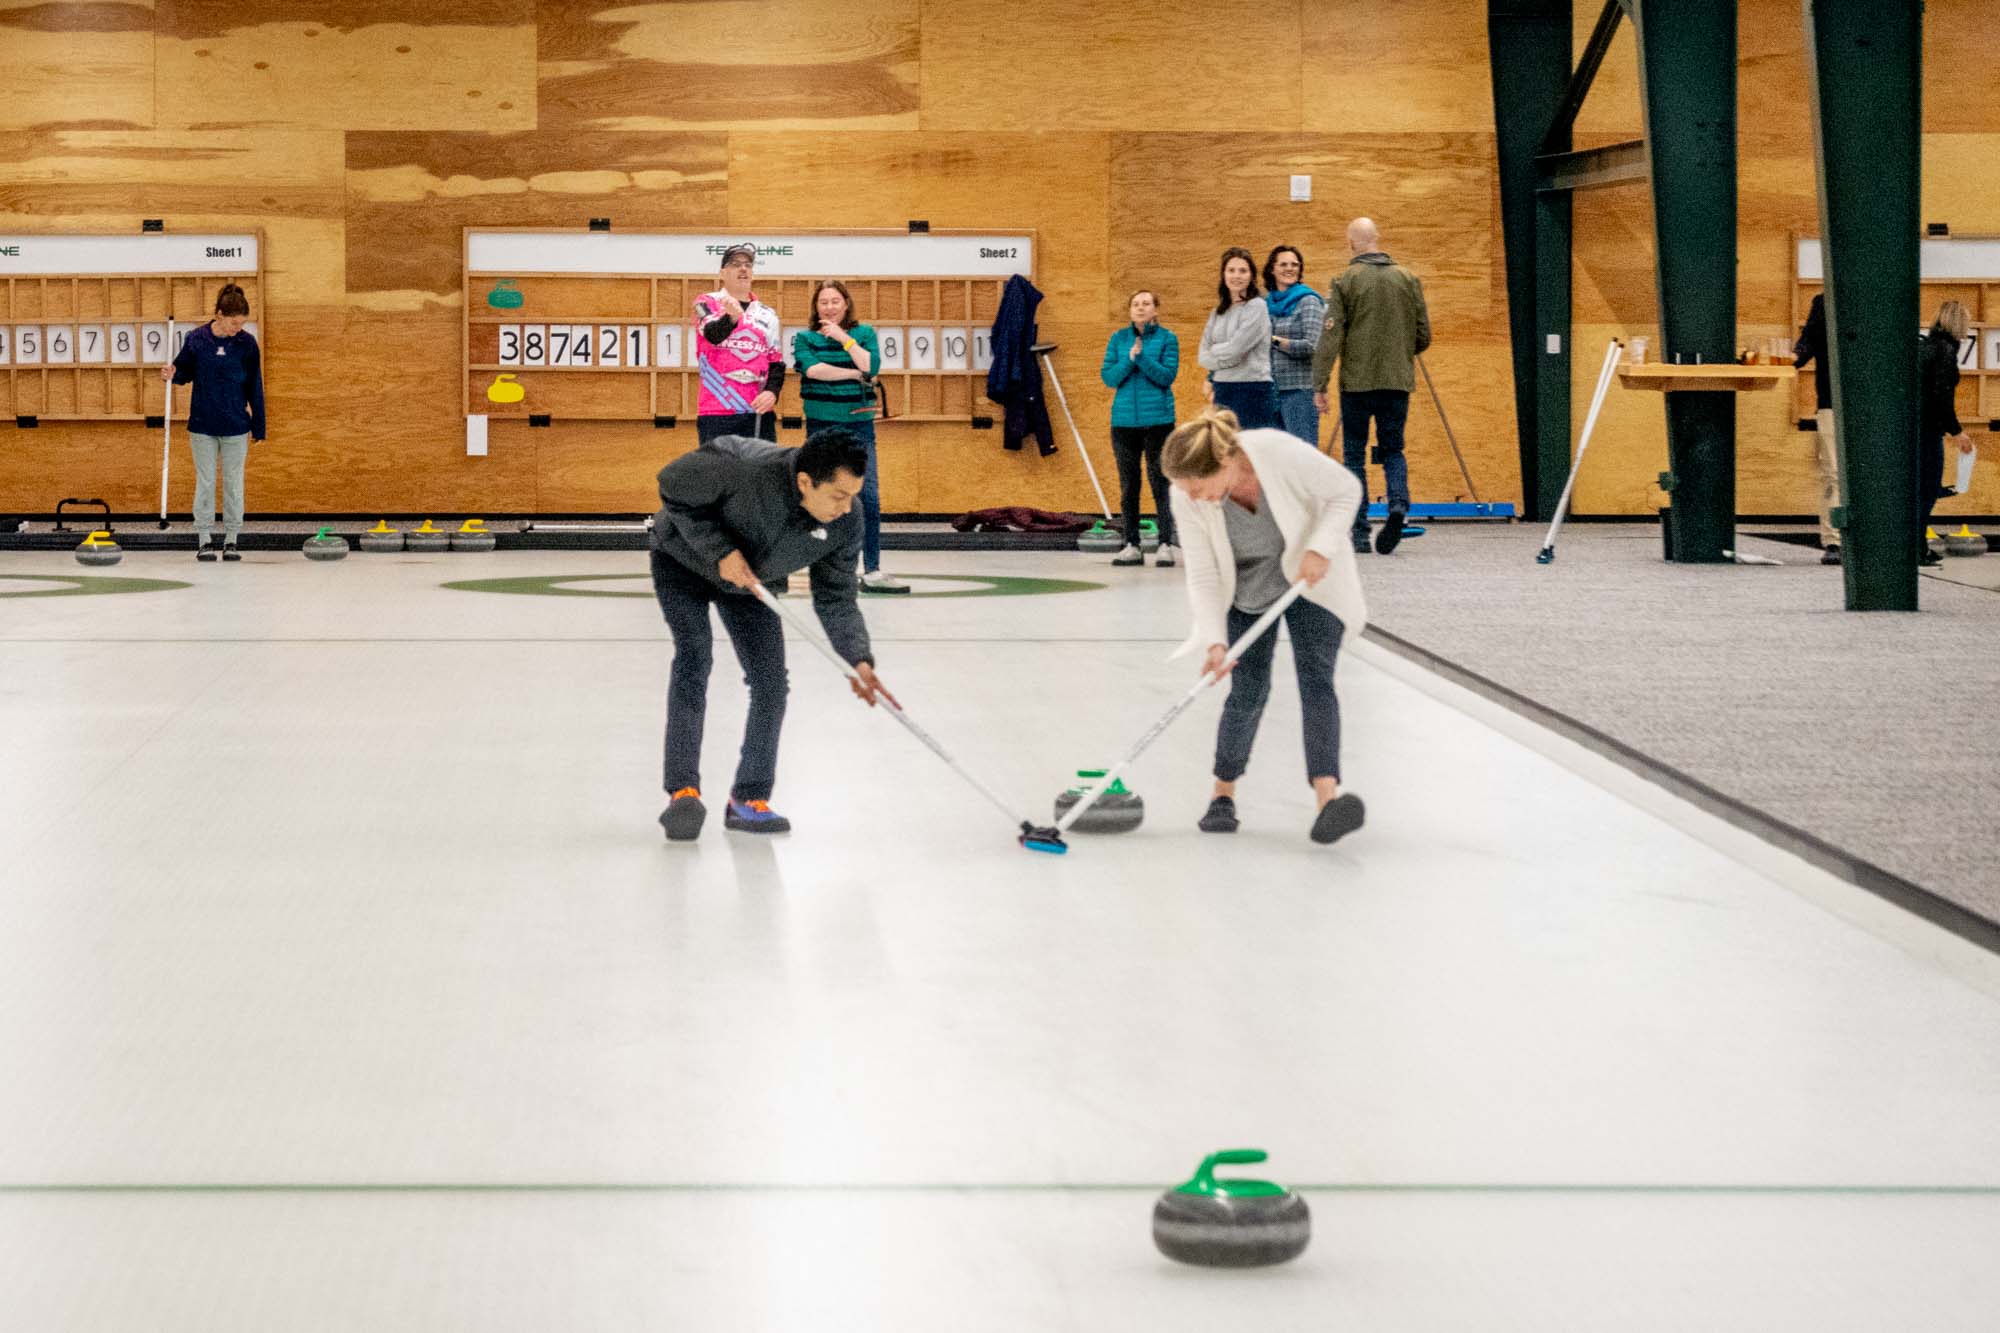 People curling stones on an ice rink.